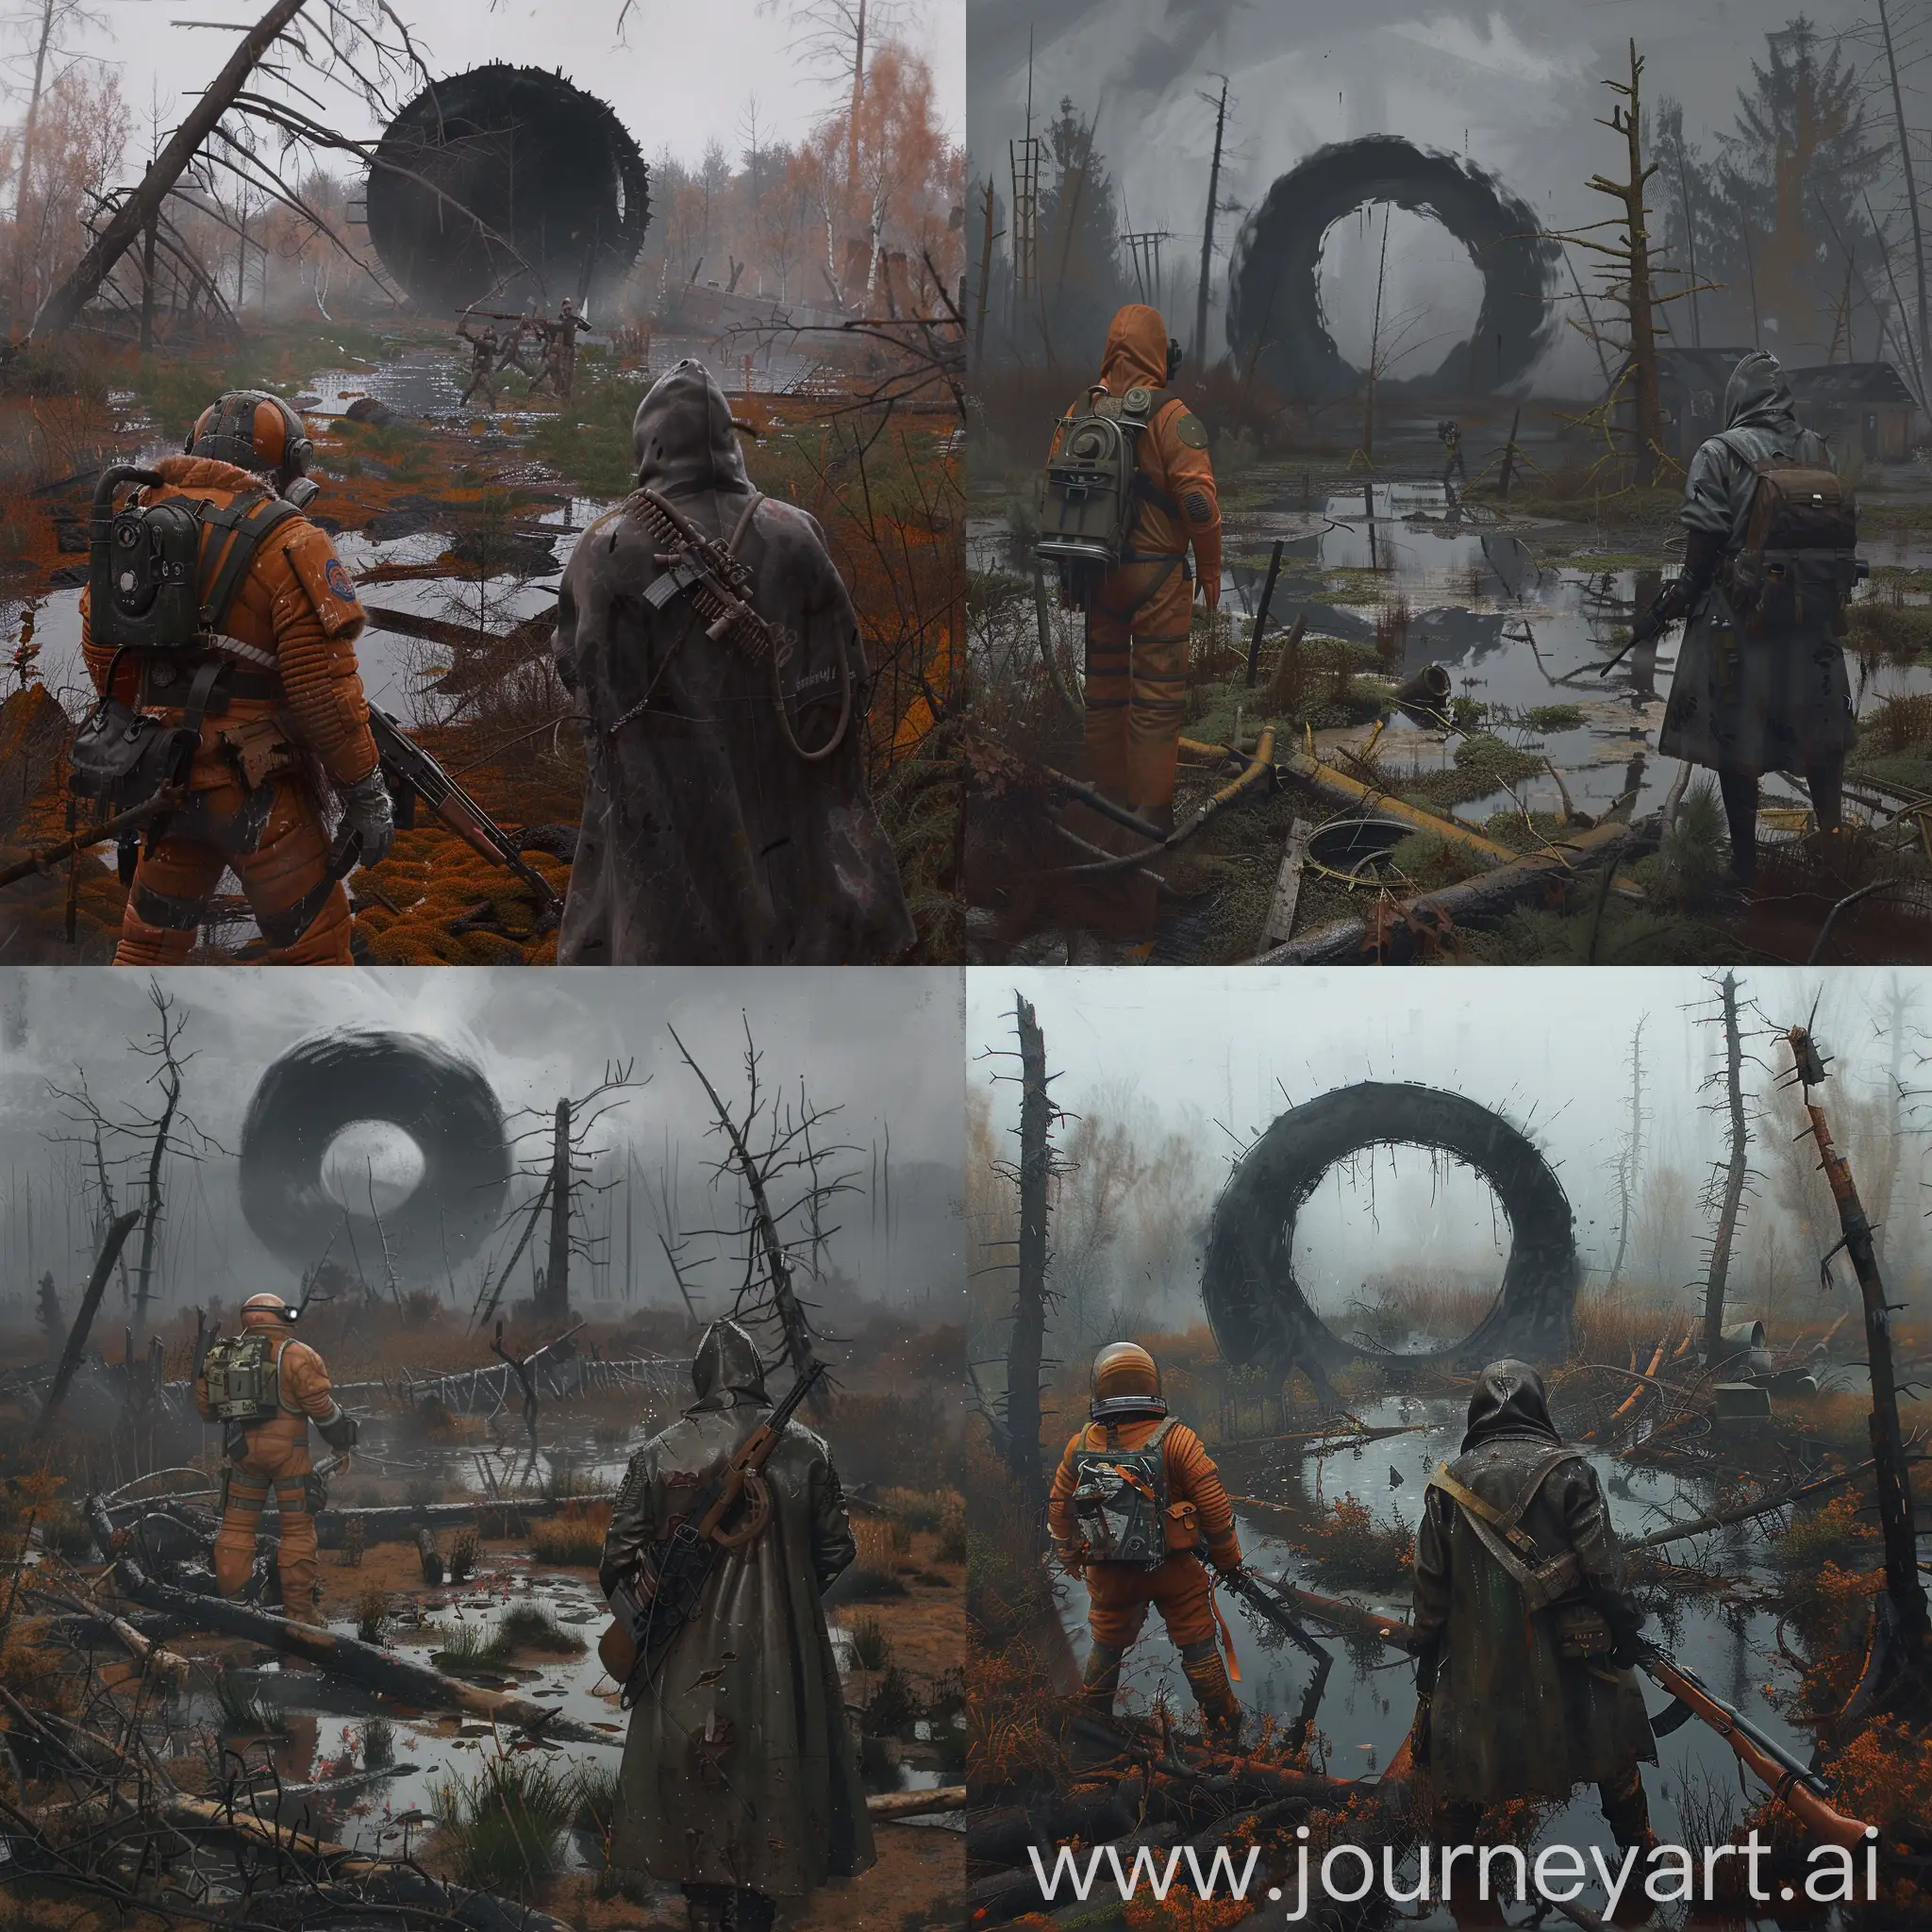 S.T.A.L.K.E.R. art, a dirty toxic swamp, abandoned Chernobyl, an abandoned village, a large black cosmic hole sucking in everything close around it, 2 characters, the first character is dressed in an orange Soviet space suit, in front of this character is a stalker in a dark gray dirty leather raincoat with a gas mask on his face with a small backpack on his back and with a Dragunov SVD sniper rifle in his hands, the weather is a gloomy autumn.